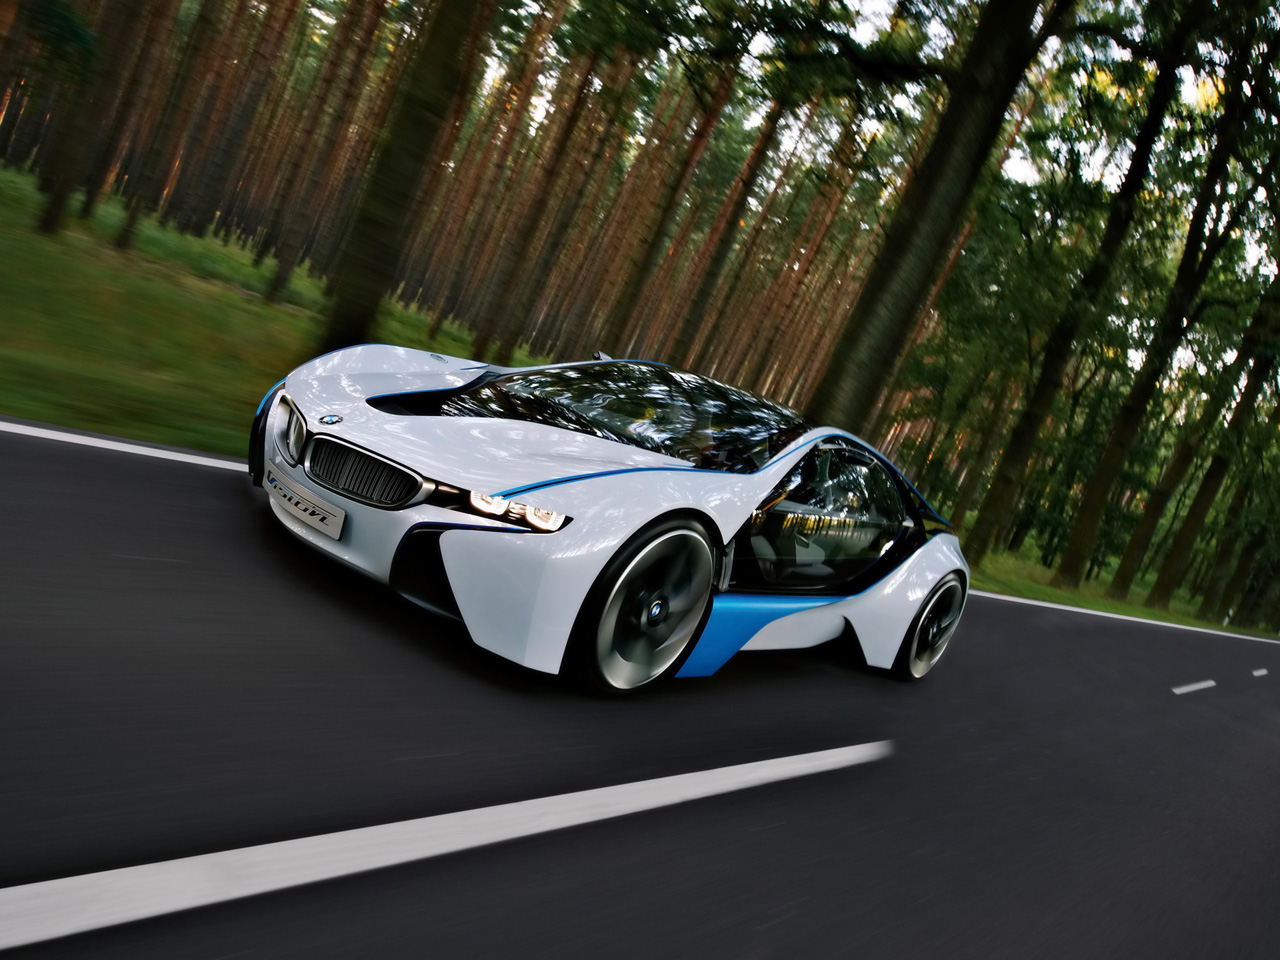 http://www.thesupercars.org/wp-content/uploads/2009/10/2009-BMW-Vision-EfficientDynamics.jpg